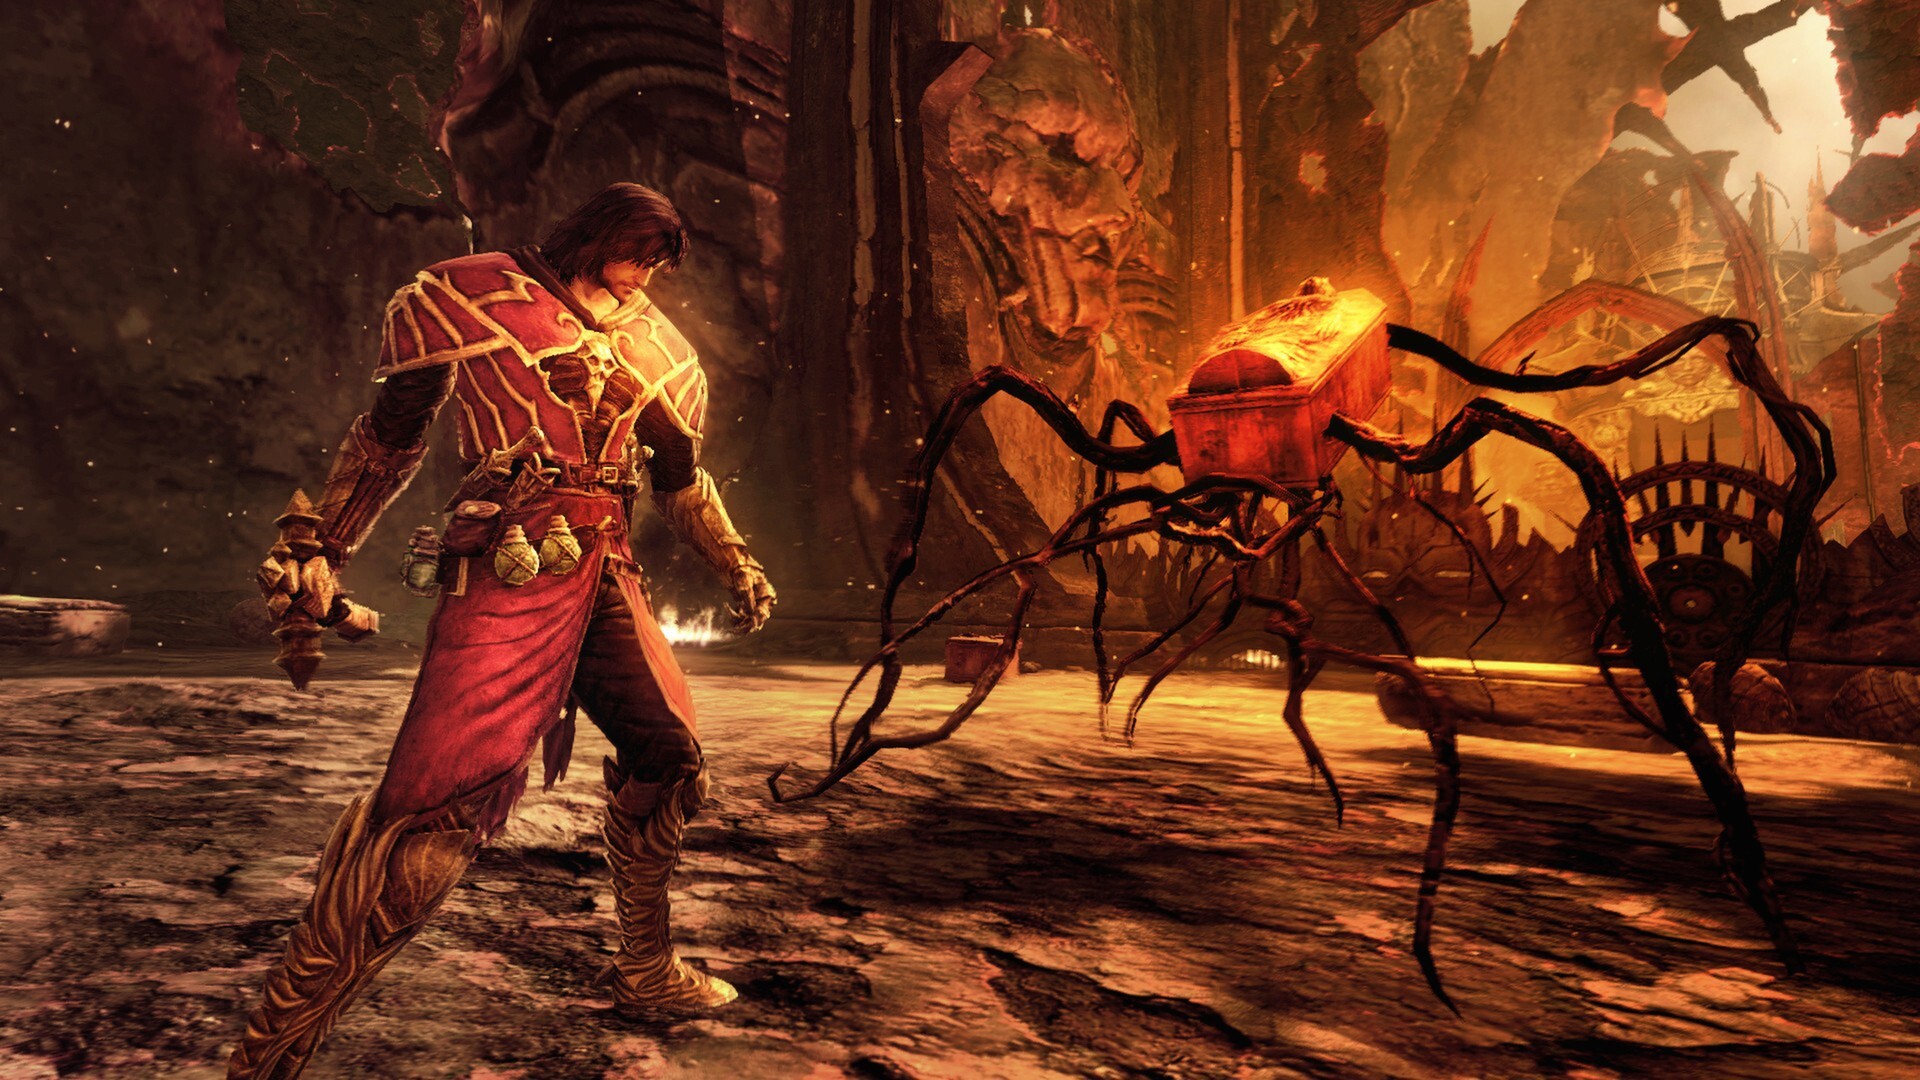 Castlevania: Lords of Shadow 2' due out next winter